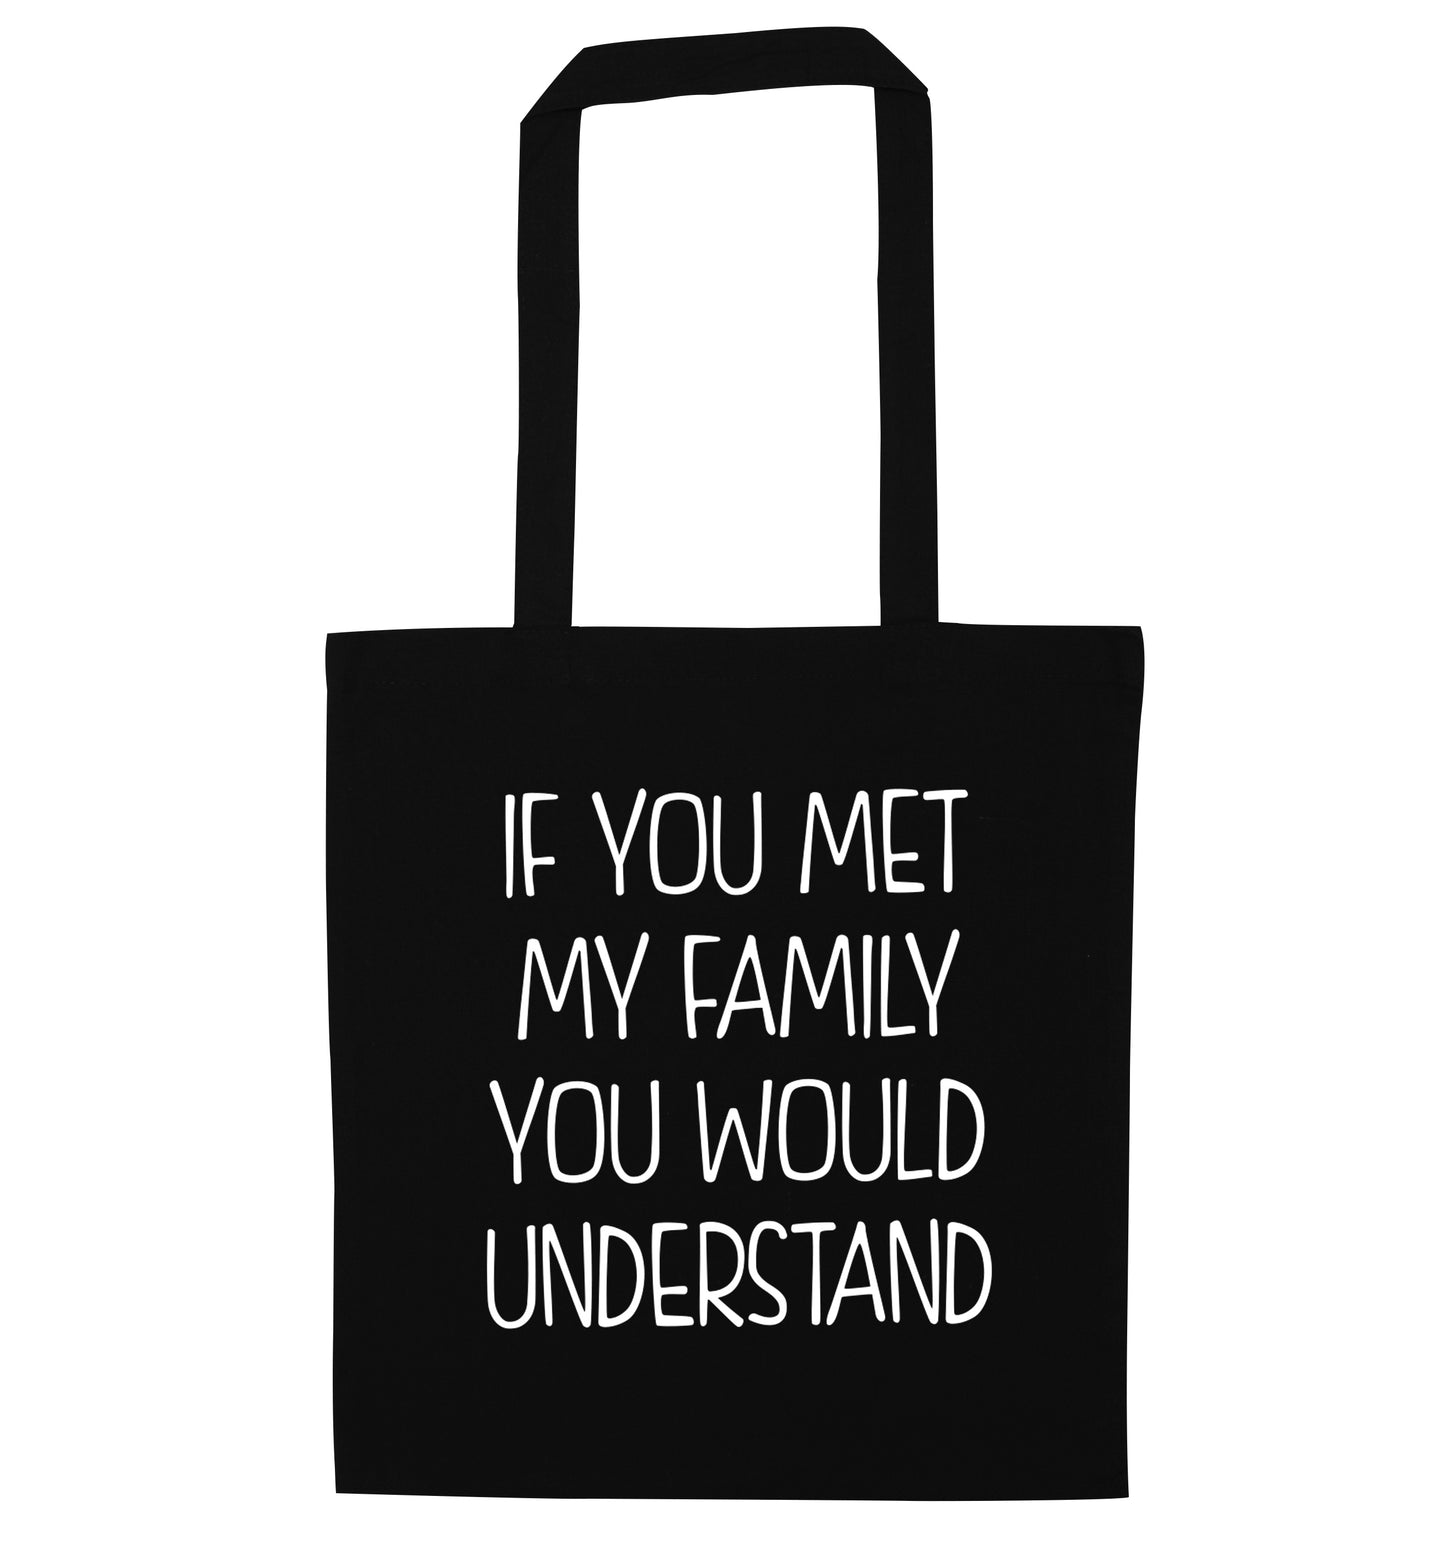 If you met my family you would understand black tote bag